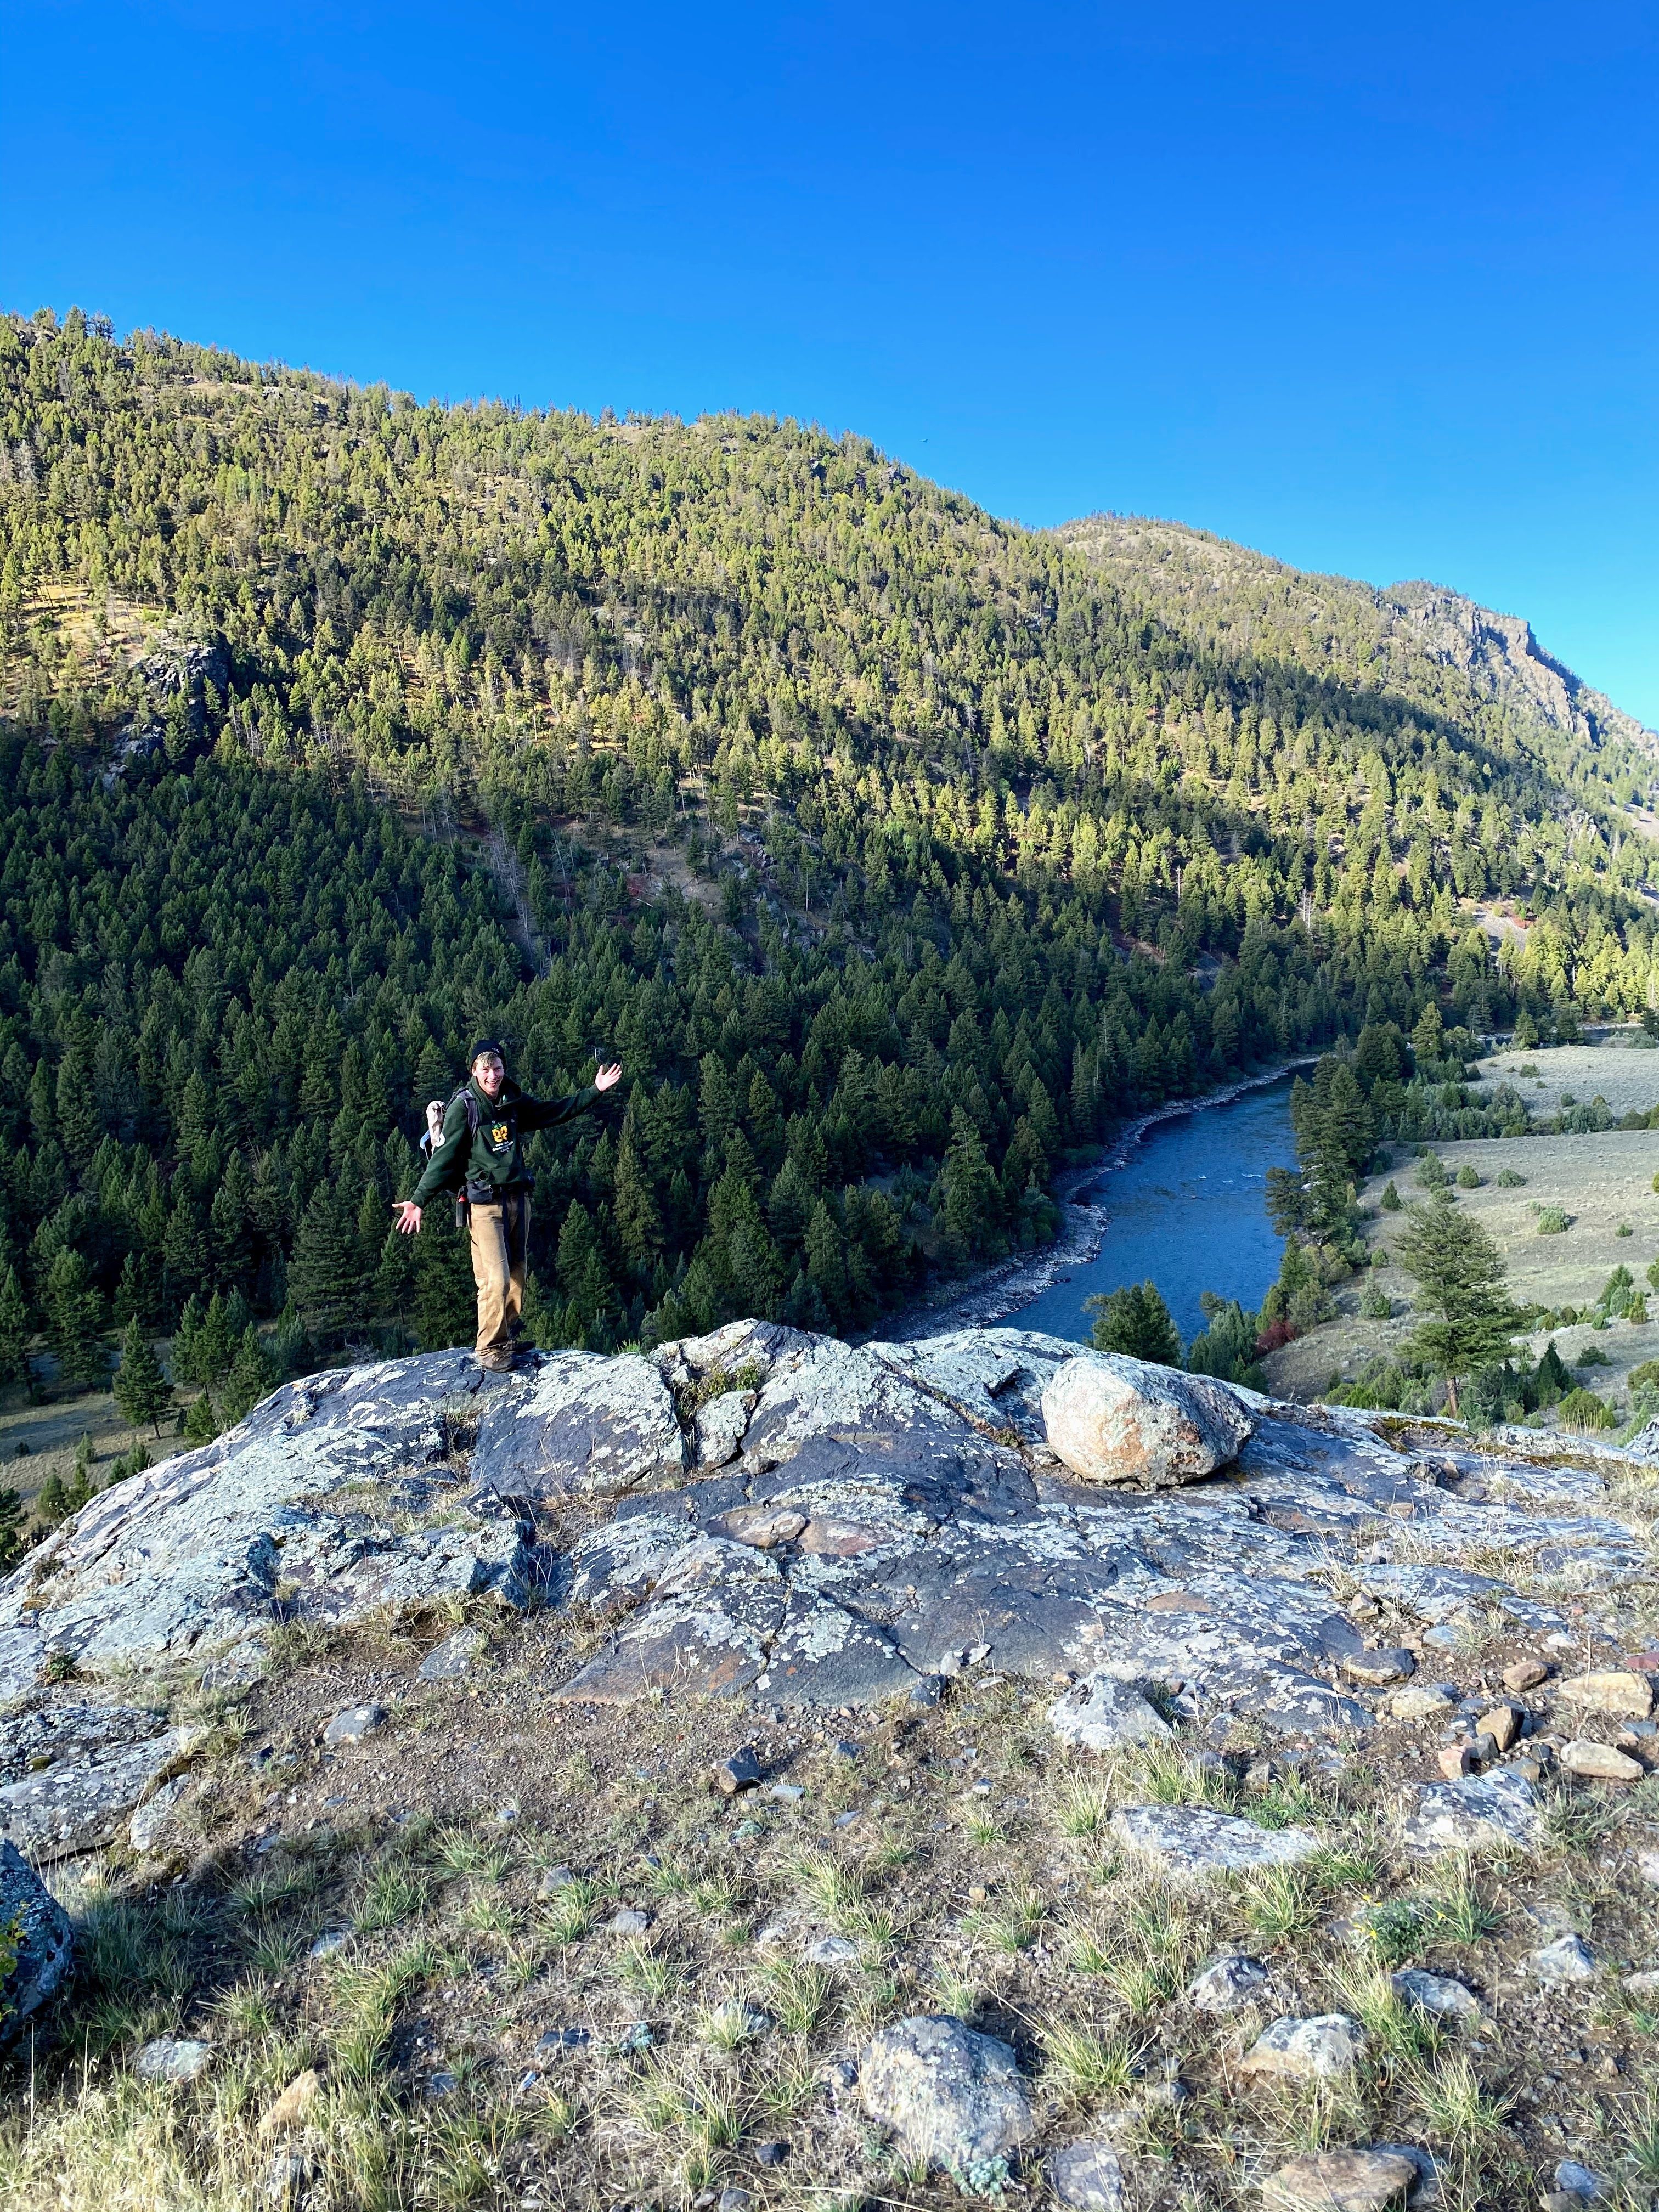 A crew member stands on an overlook above a river